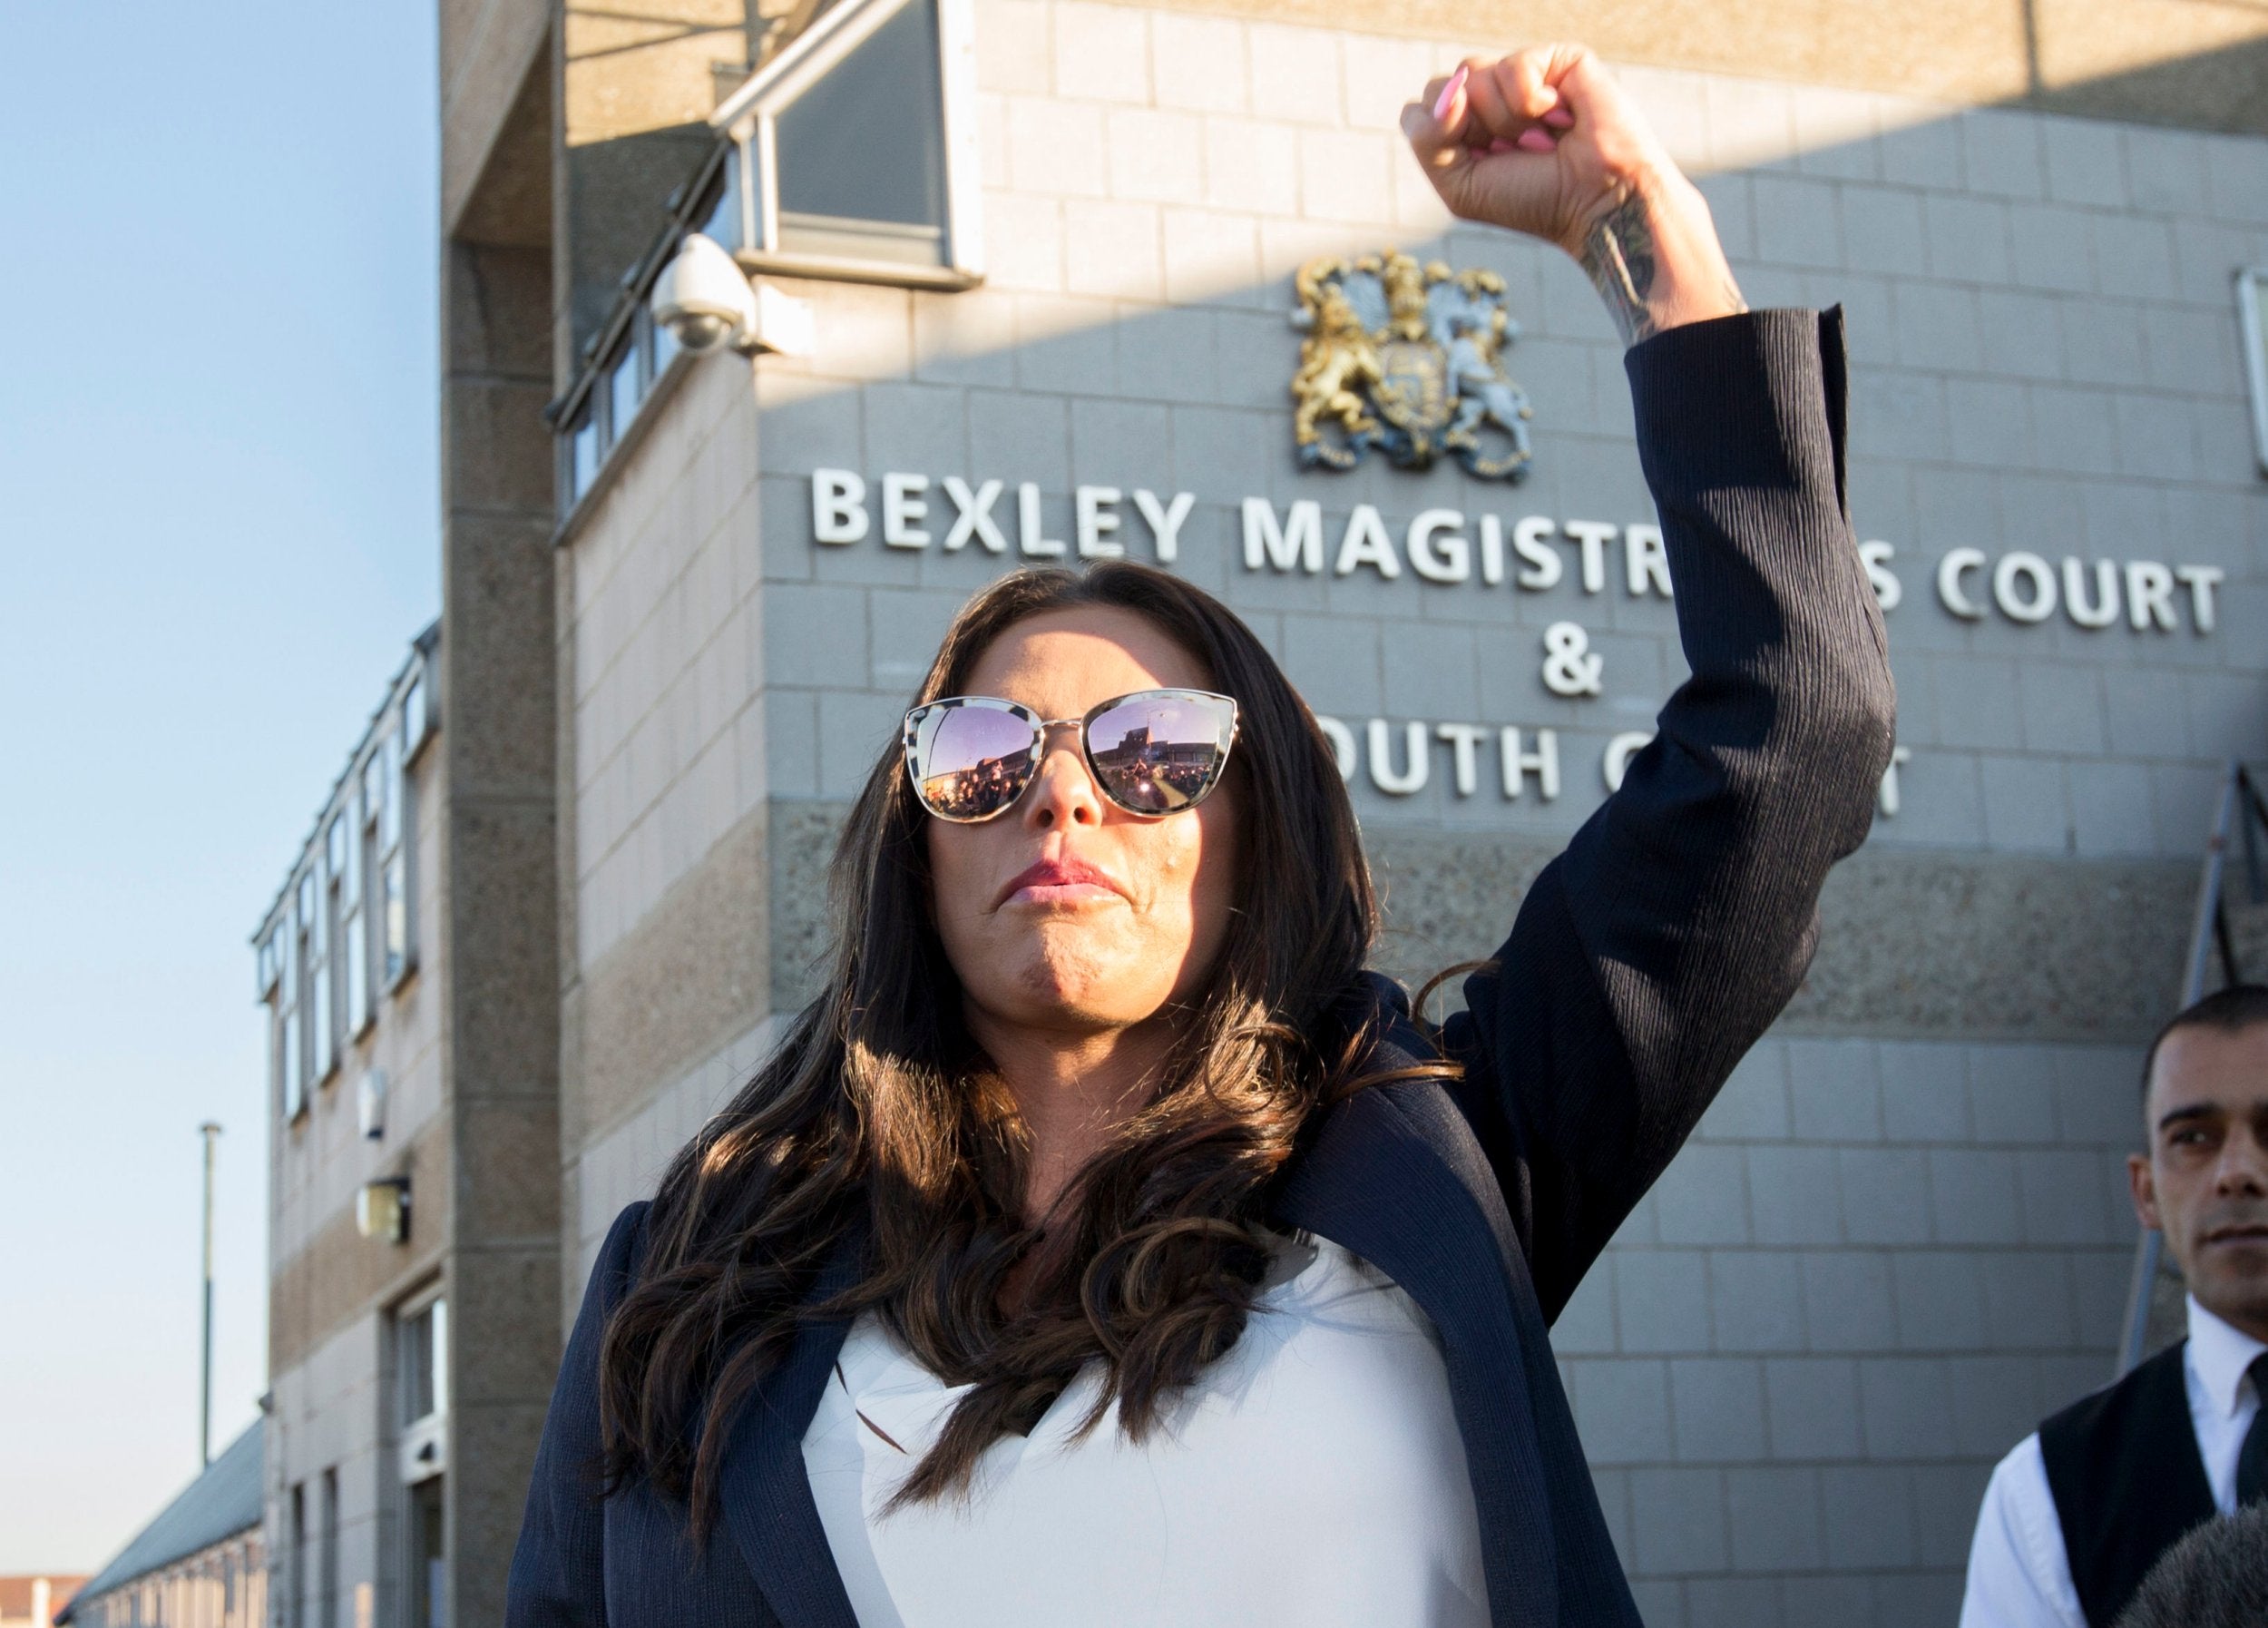 Katie Price outside Bexley Magistrates' Court after she was banned from driving following her drink-driving conviction last month.